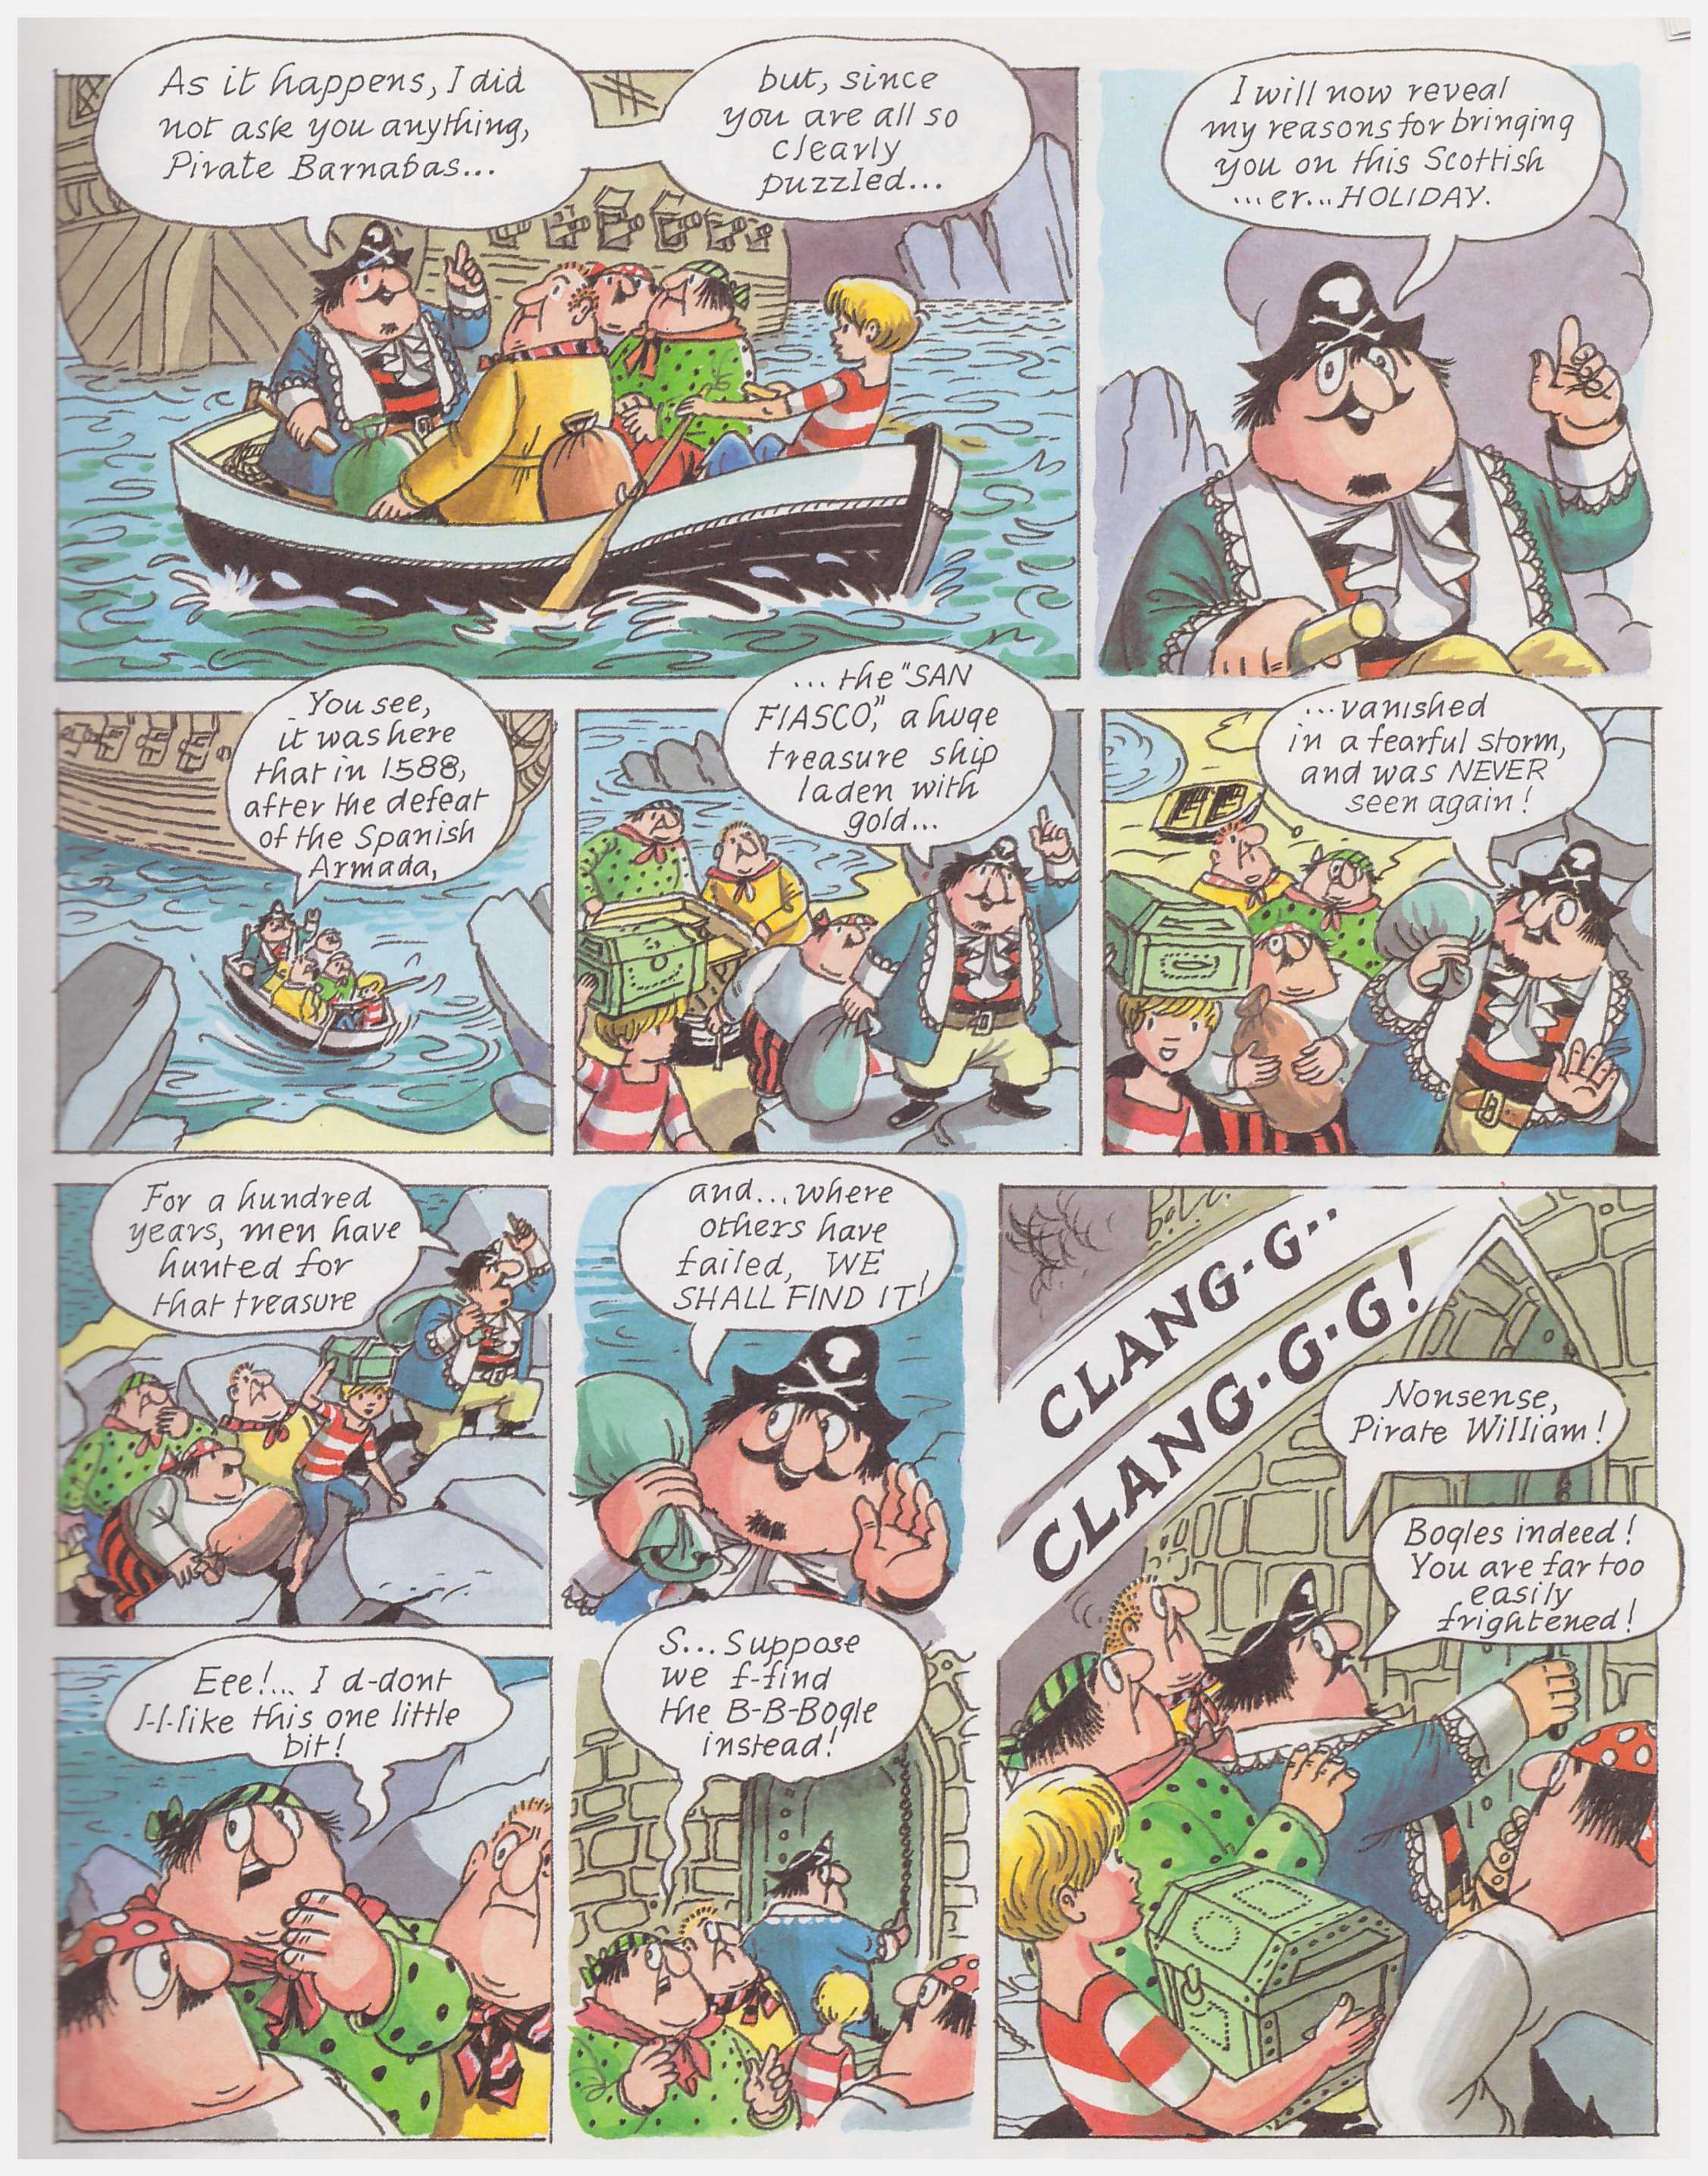 What was the name of Captain Pugwash's boat?